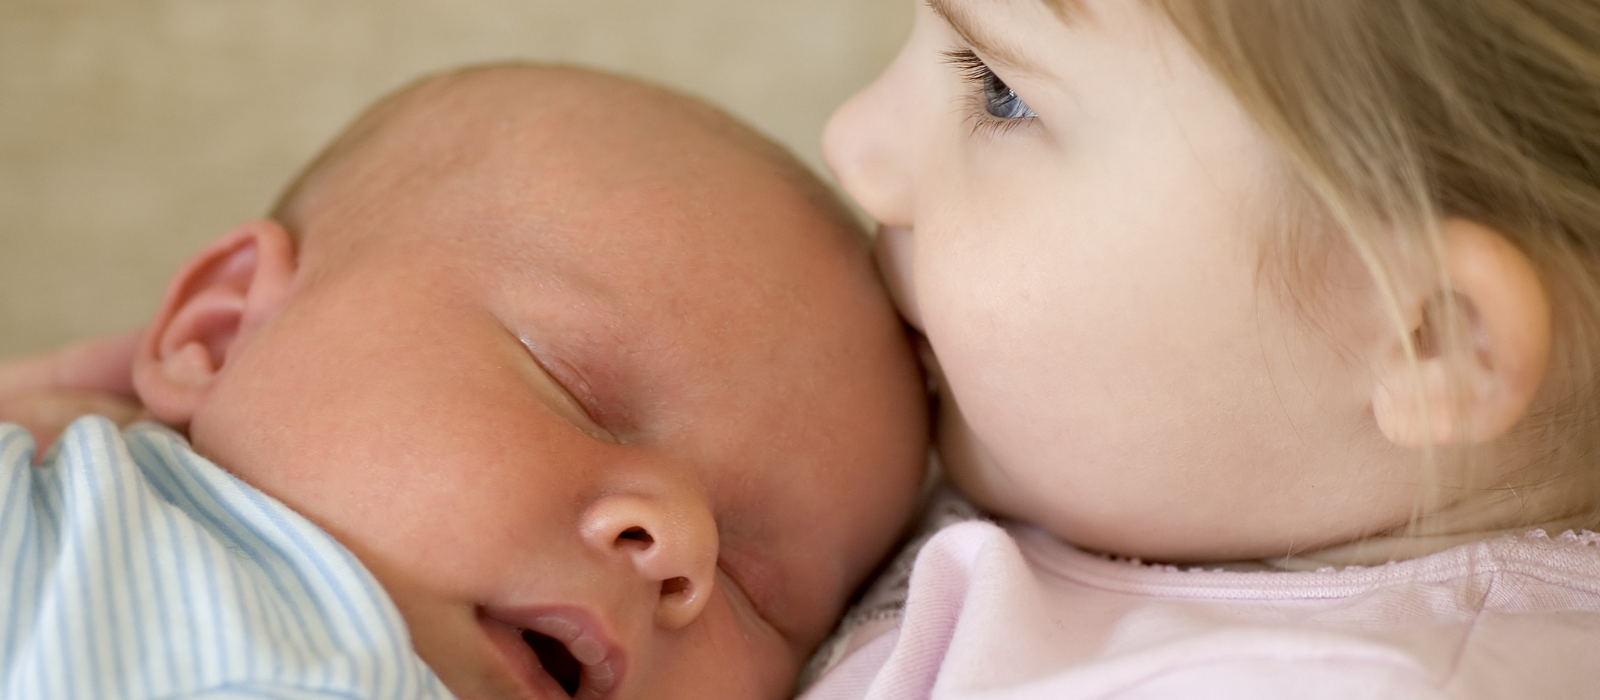 Bringing home baby: Helping your older child adjust to a new sibling